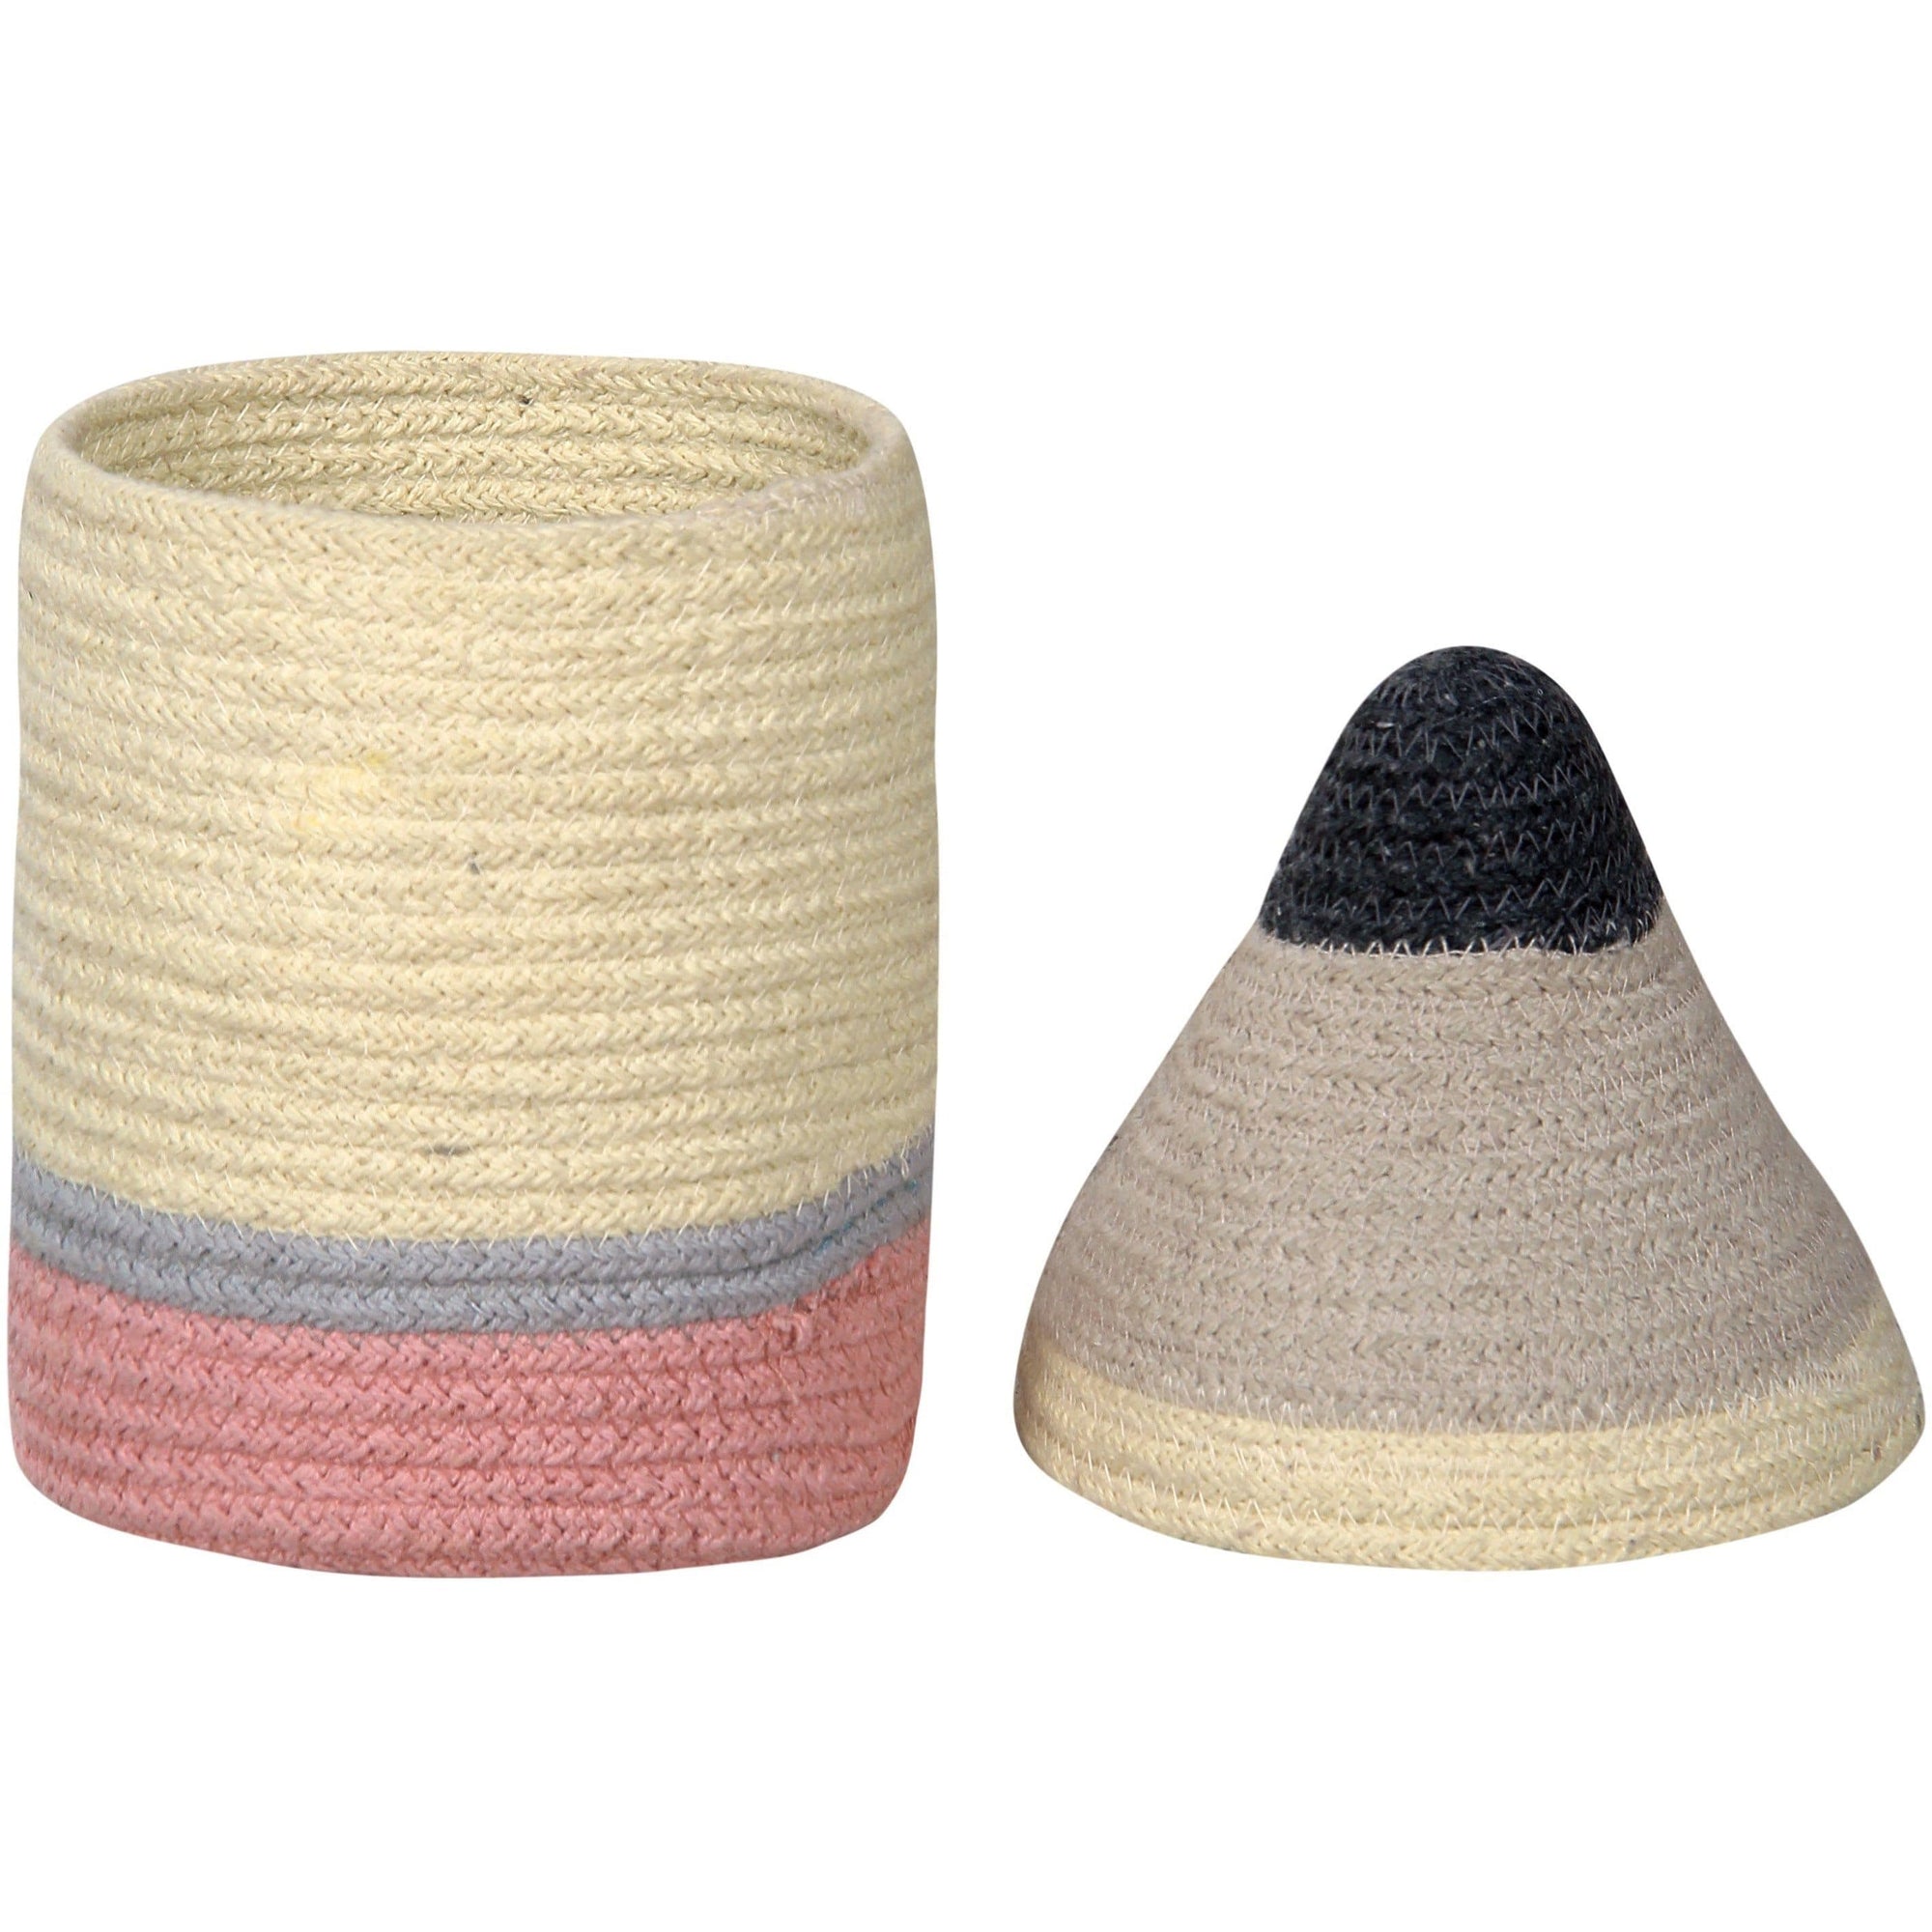 Rugs by Roo | Lorena Canals Pencil Small Basket-BSK-PENCIL-S